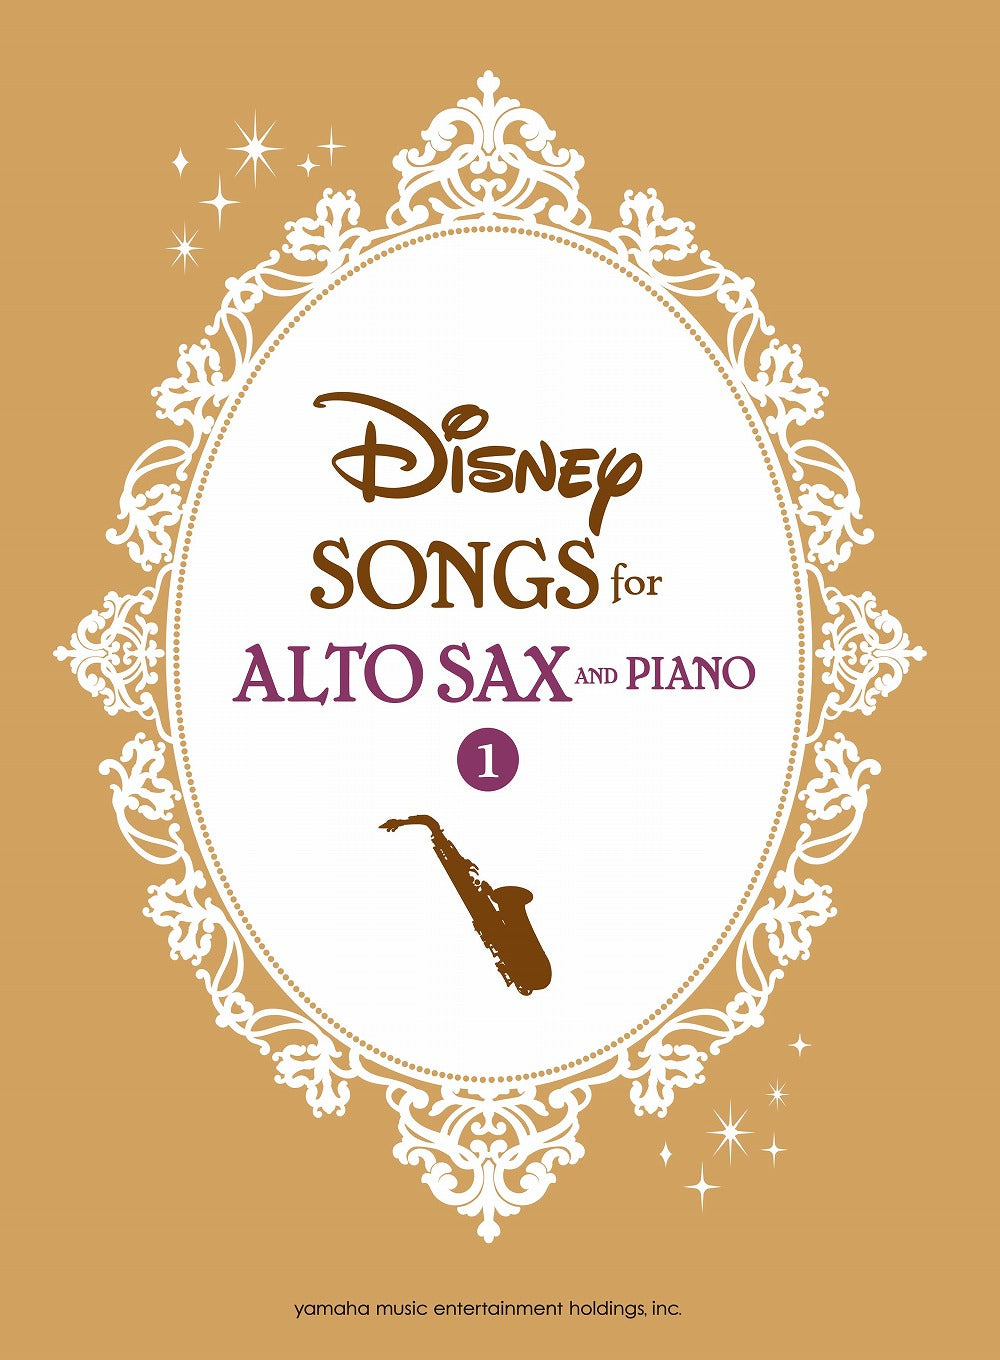 Disney Songs for Alto Saxophone and Piano 1/English Version